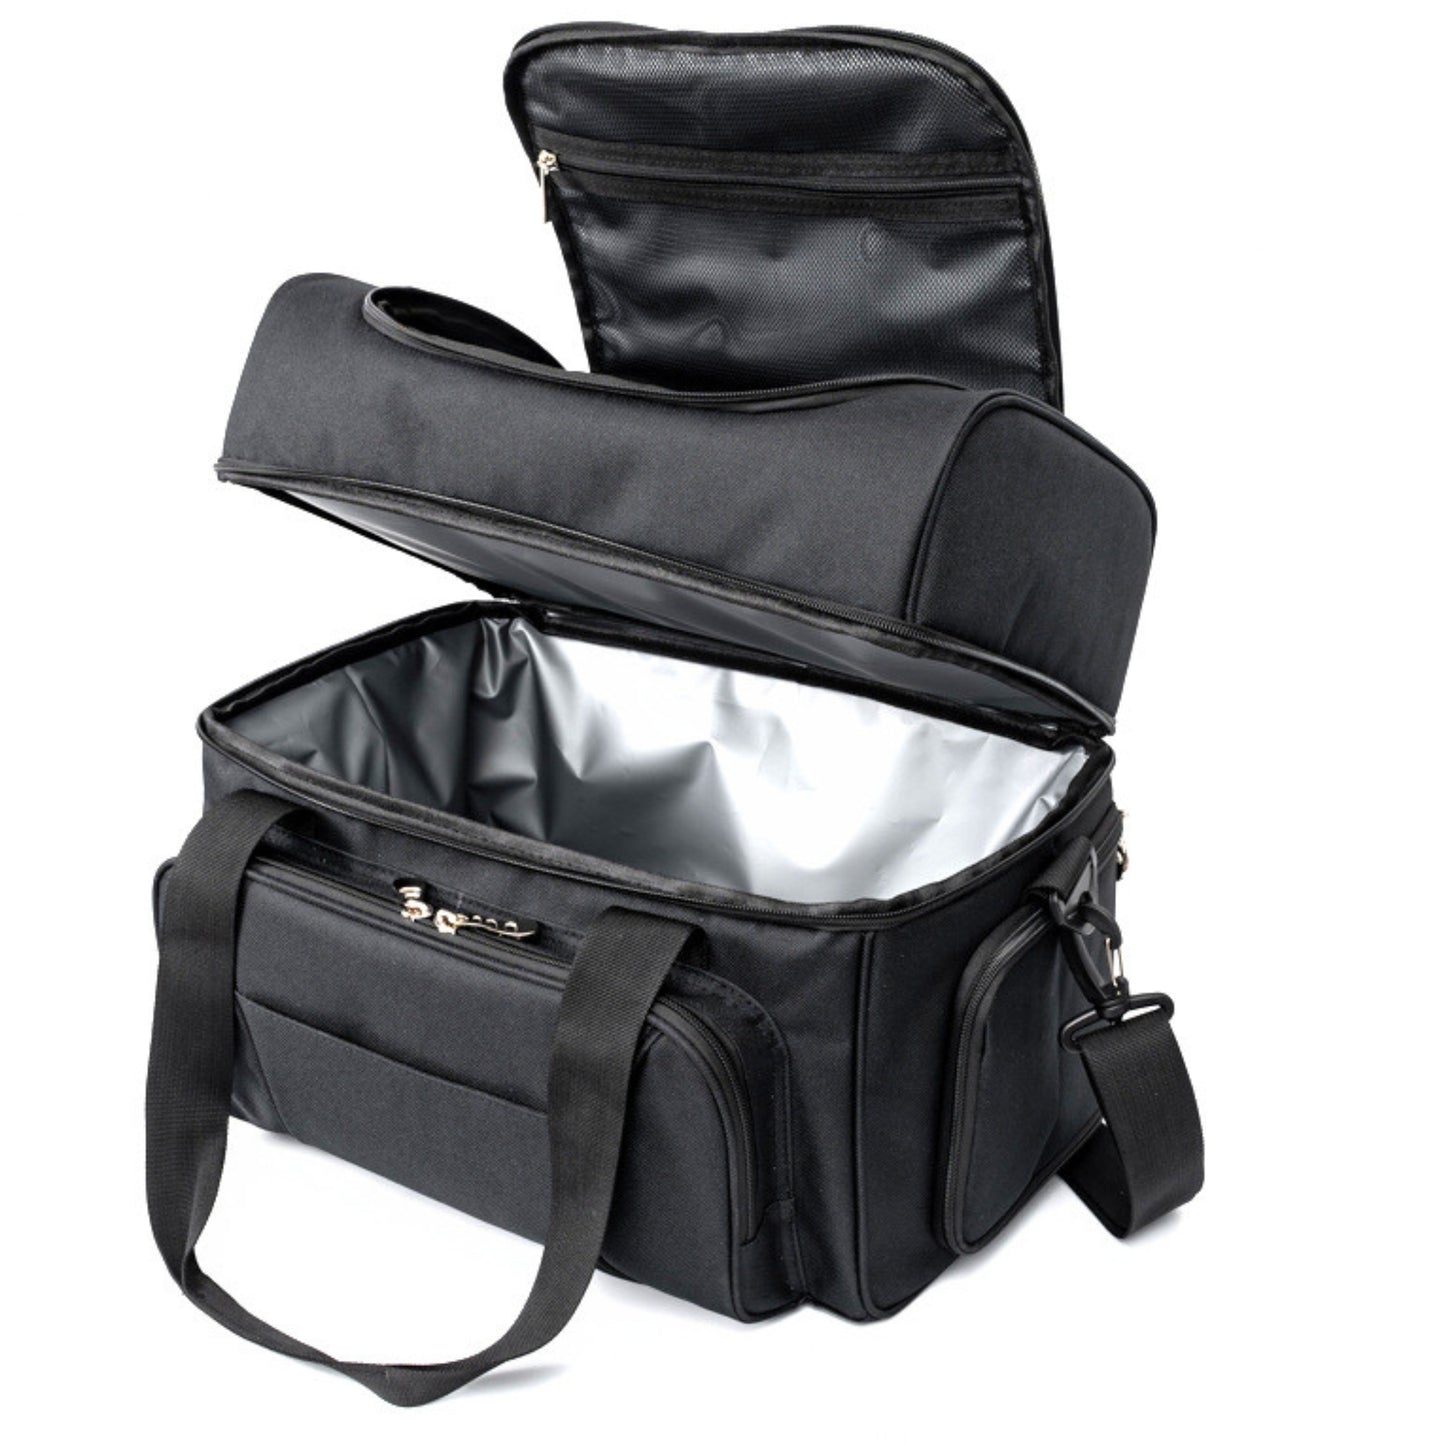 BUILT All Day Water-Resistant Insulated Fabric Lunch Bag with Zip Closure  and Removable Shoulder Strap Black 5227344